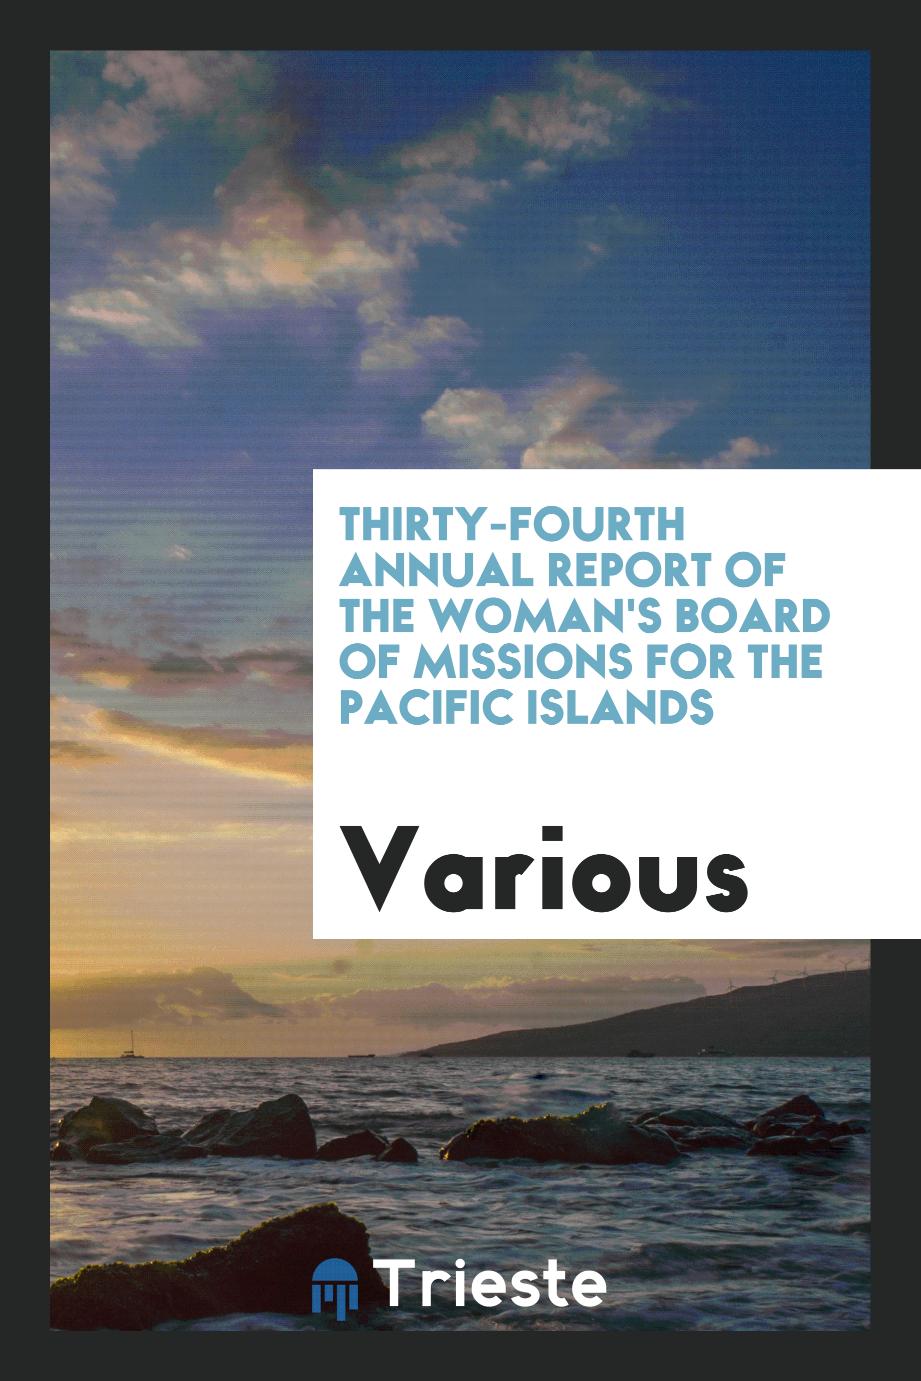 Thirty-fourth Annual Report of the woman's board of missions for the Pacific Islands